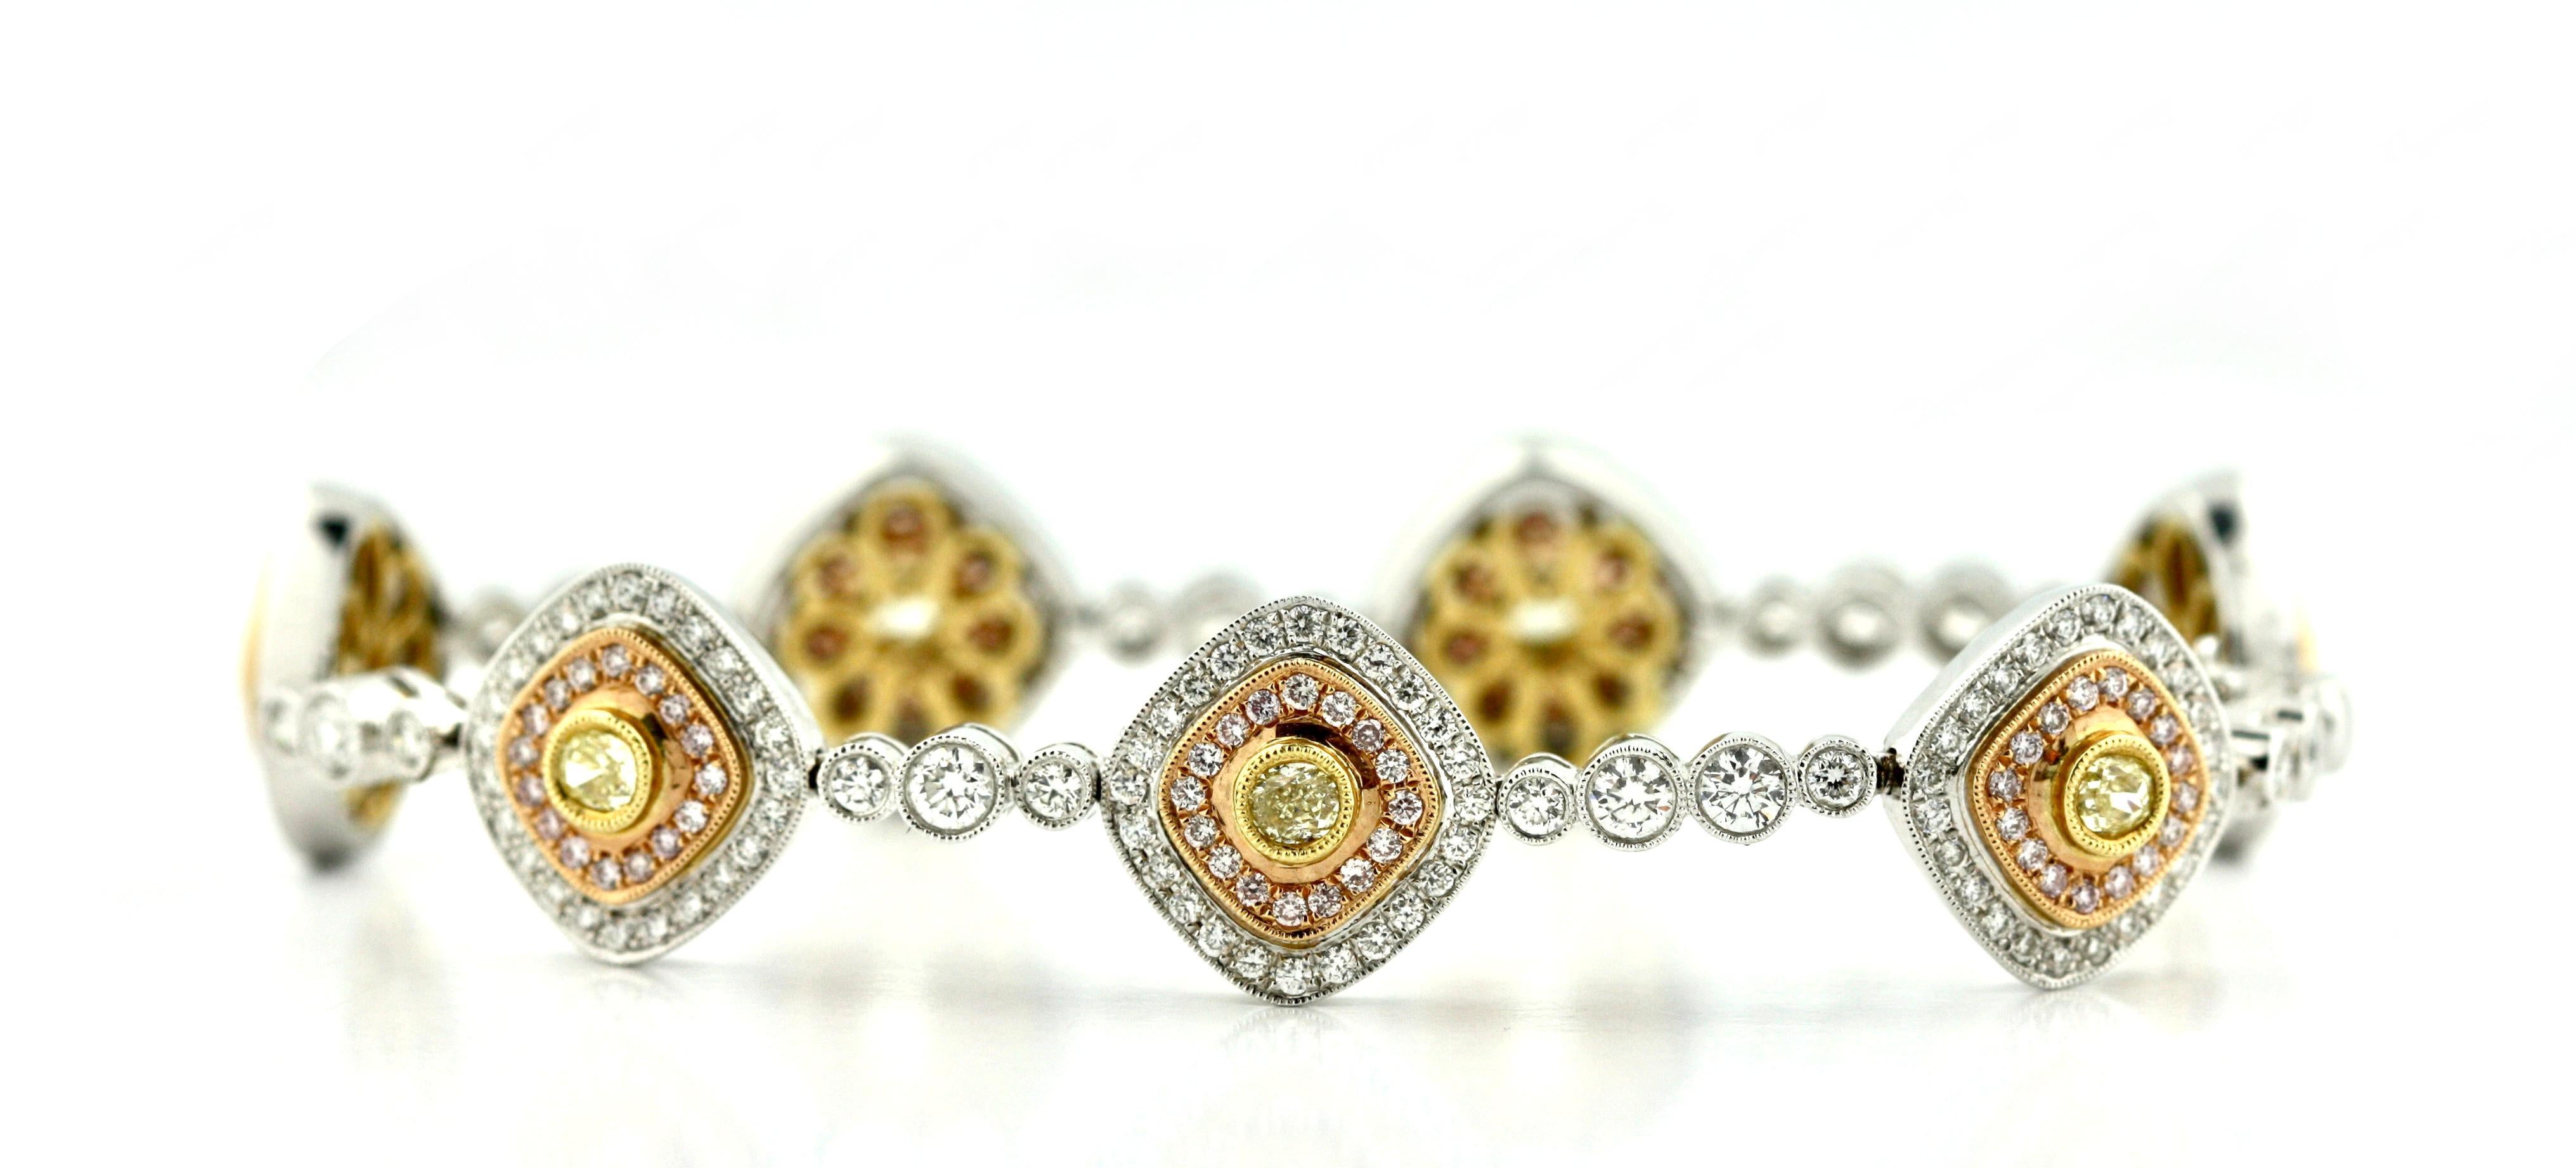 
Fine 18 Karat Gold, Diamond and Diamond Bracelet, 
composed of round, yellow and pink diamonds weighing a total of approximately 4.95 carats, gross weight approximately 18 dwts,
length 7 inches